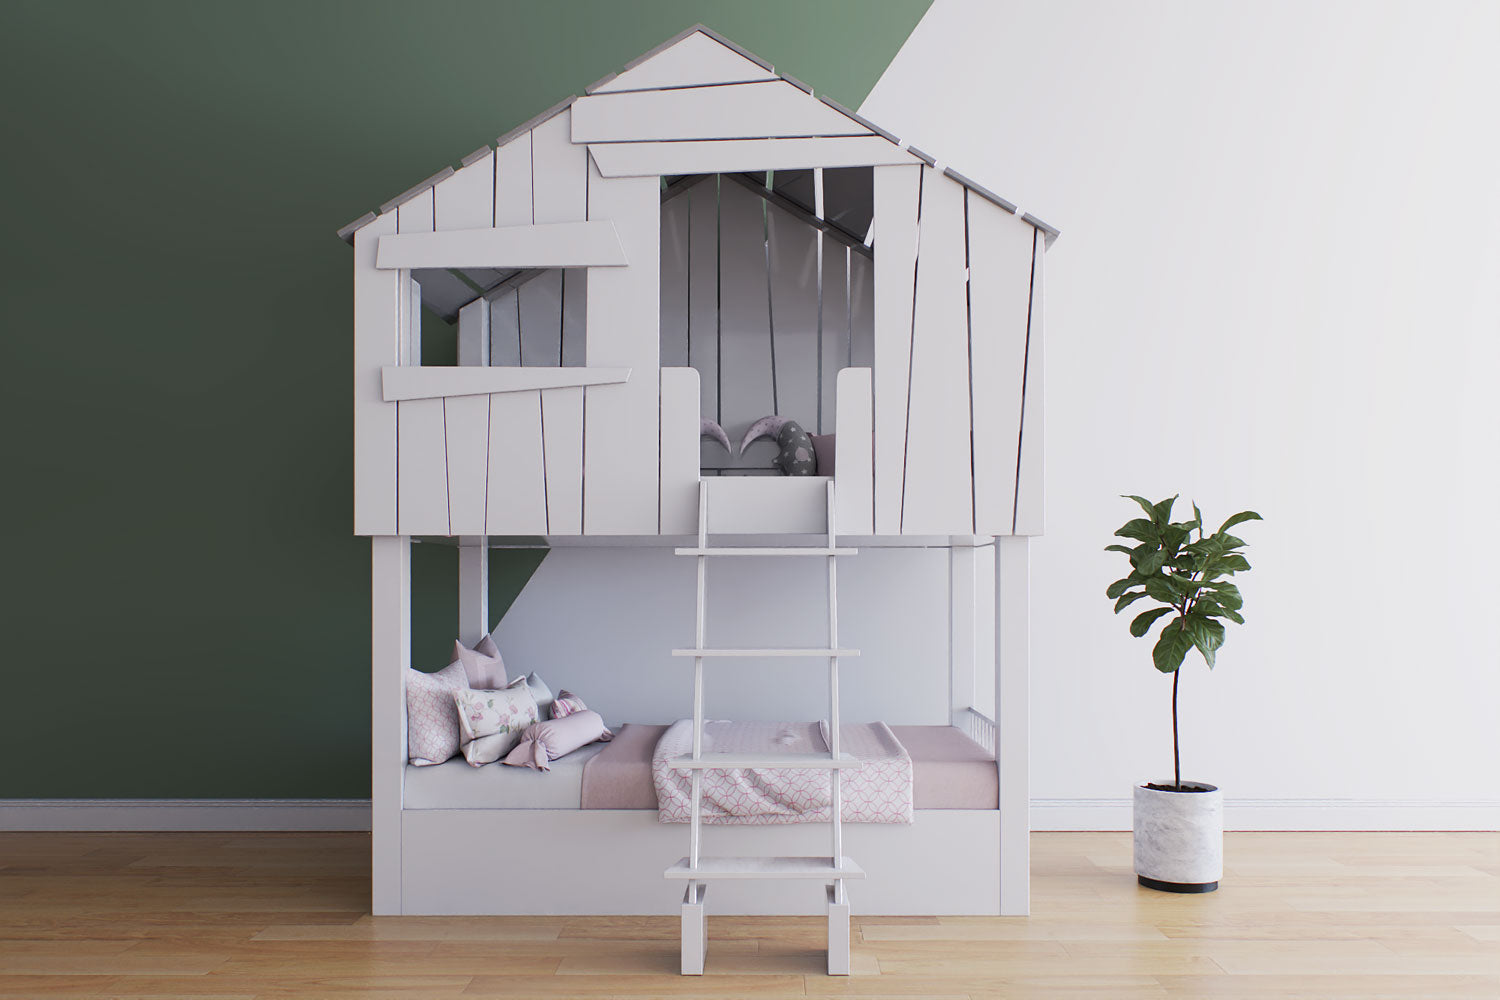 Minimalistic child's loft bed designed as a quaint house, complete with a ladder and a comfortable reading nook, adjacent to a potted plant.